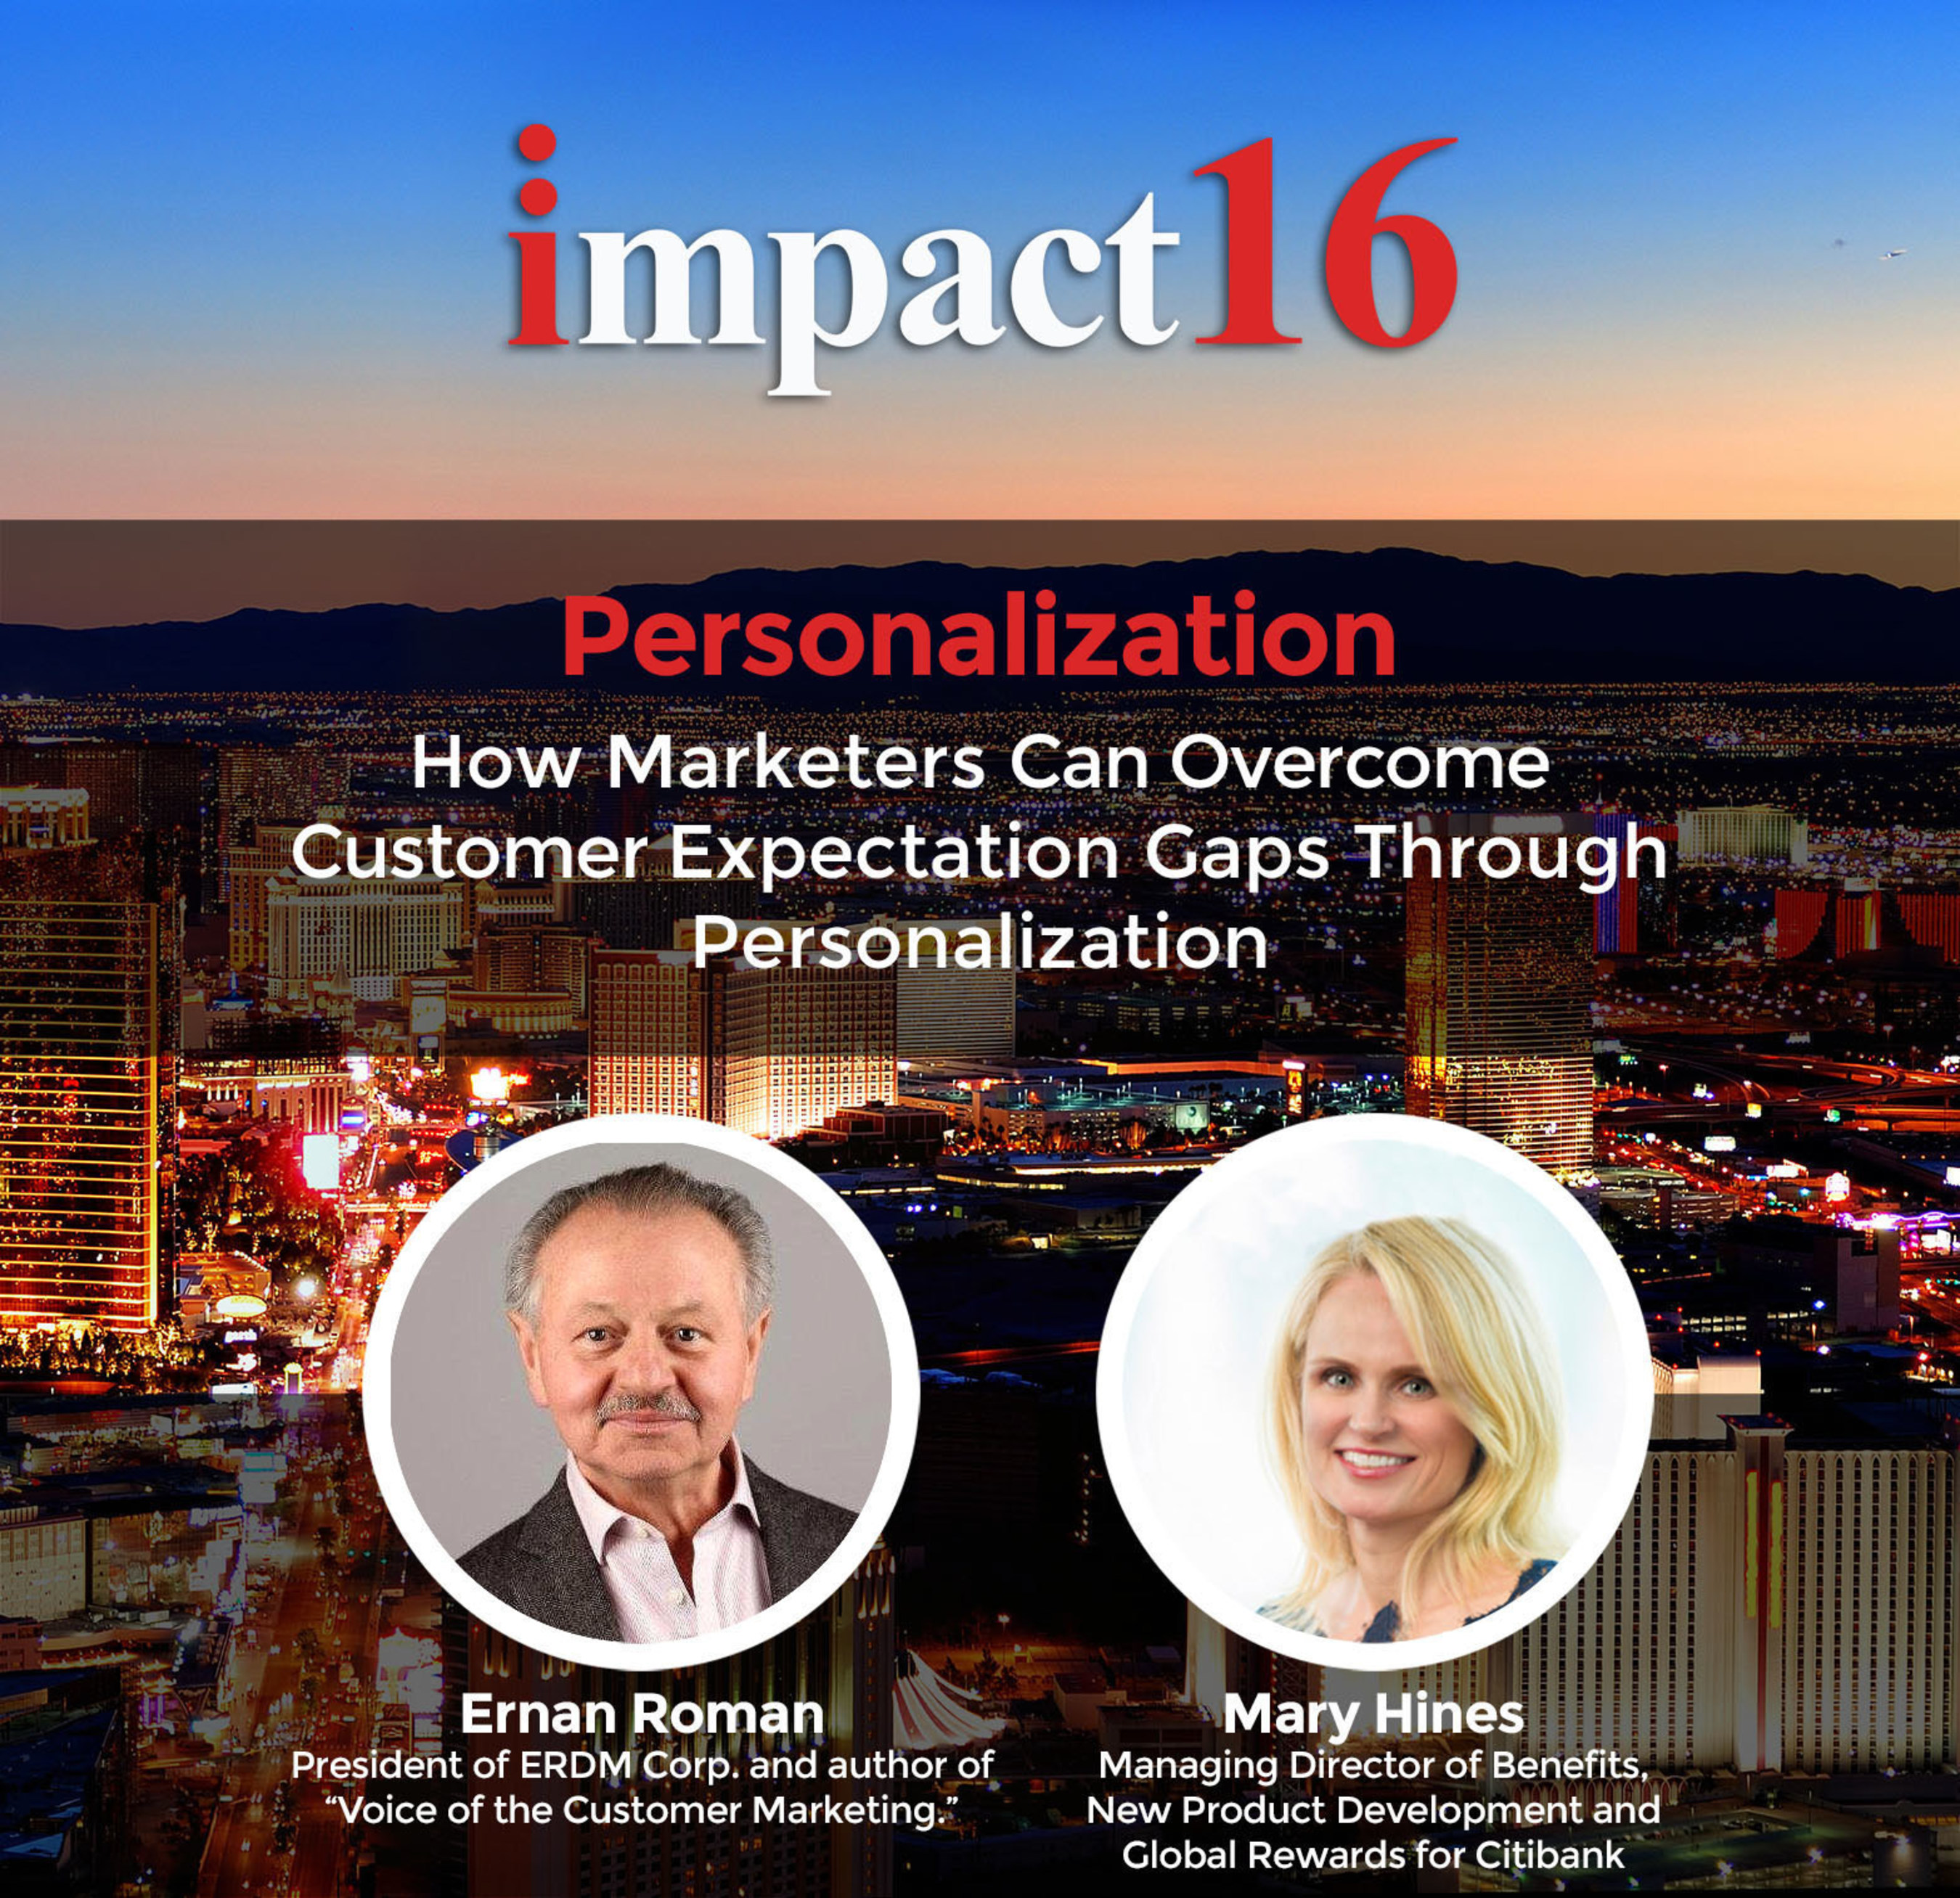 IMPACT16 to Feature Presentation on How Marketers Can Overcome Customer Expectation Gaps Through Personalization